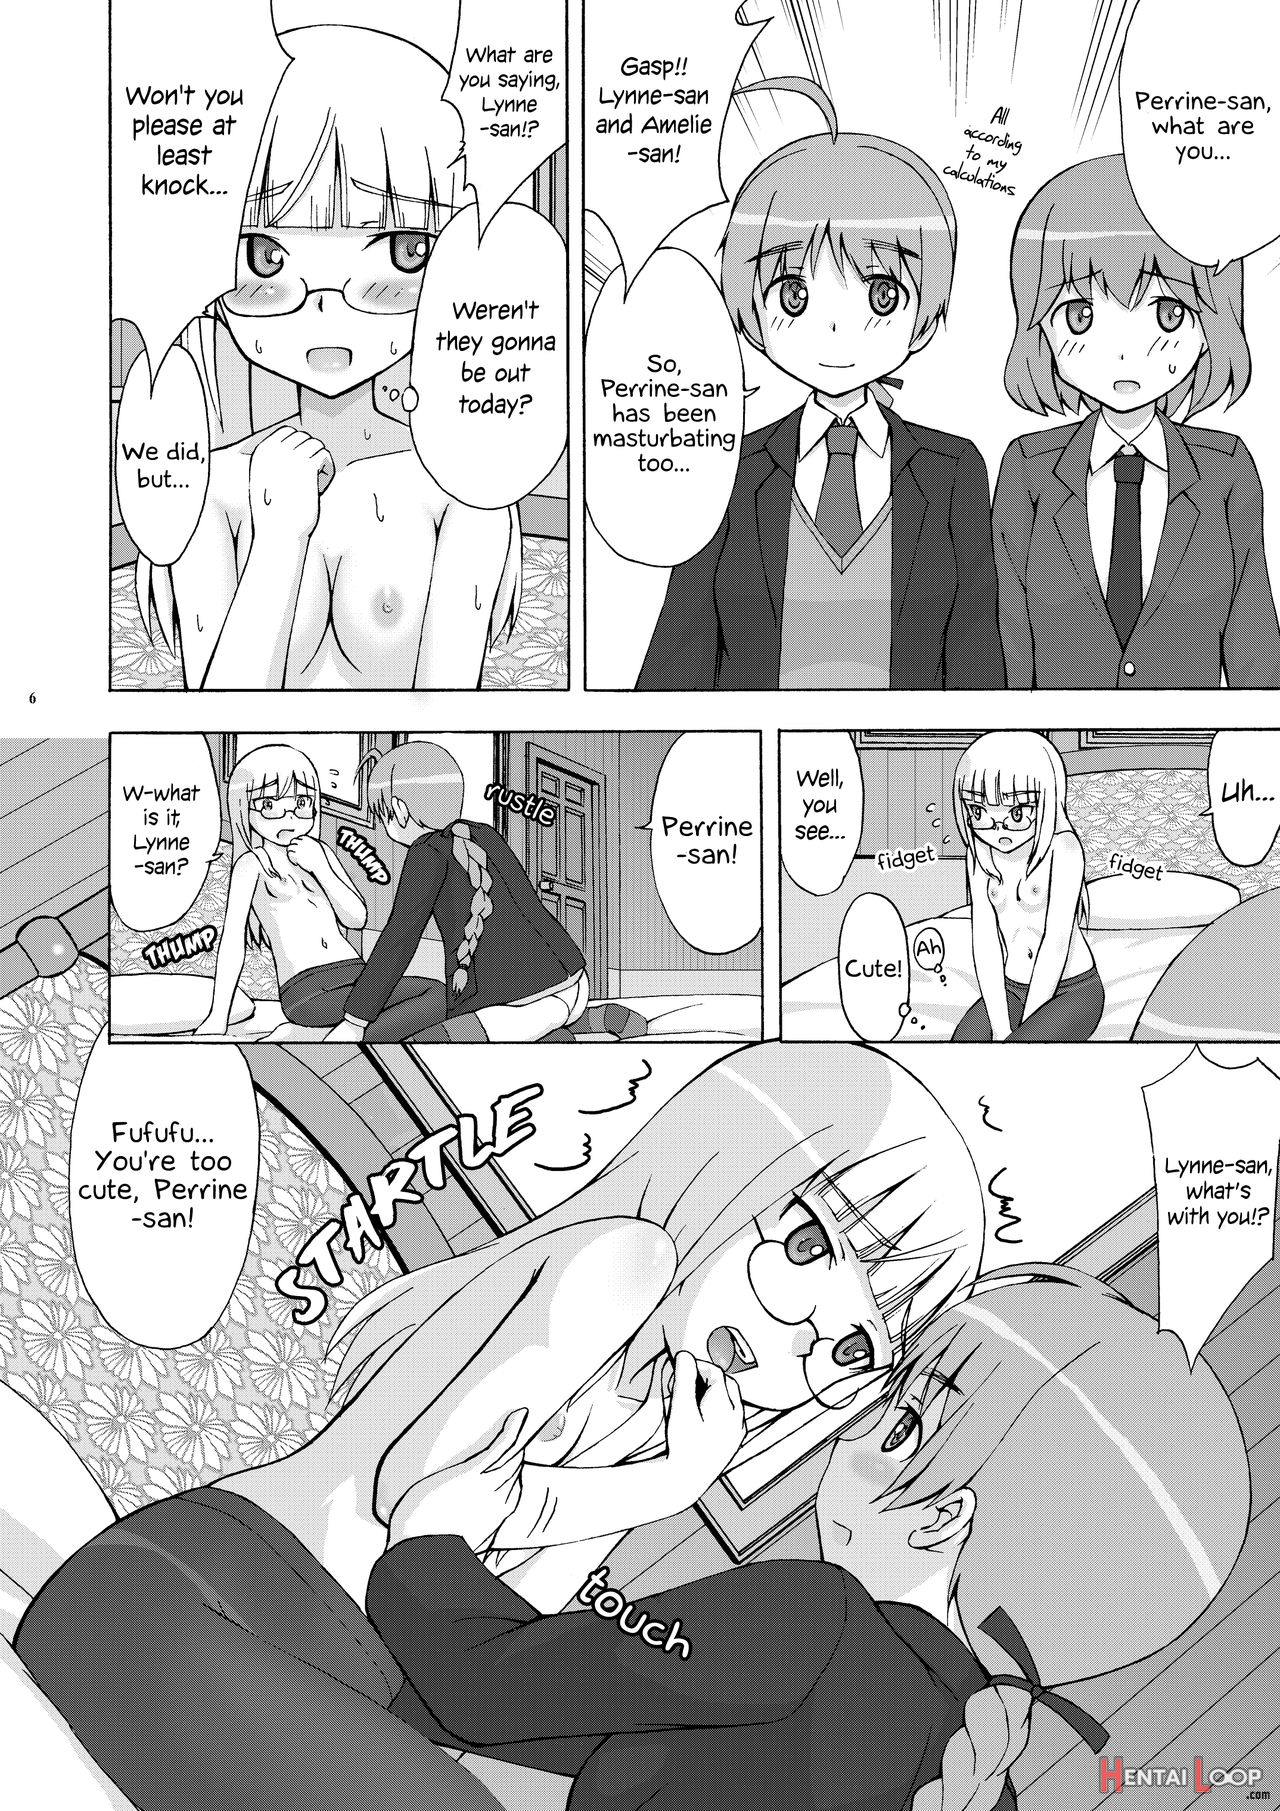 Trouble Of Perrine's Parcel!! page 6